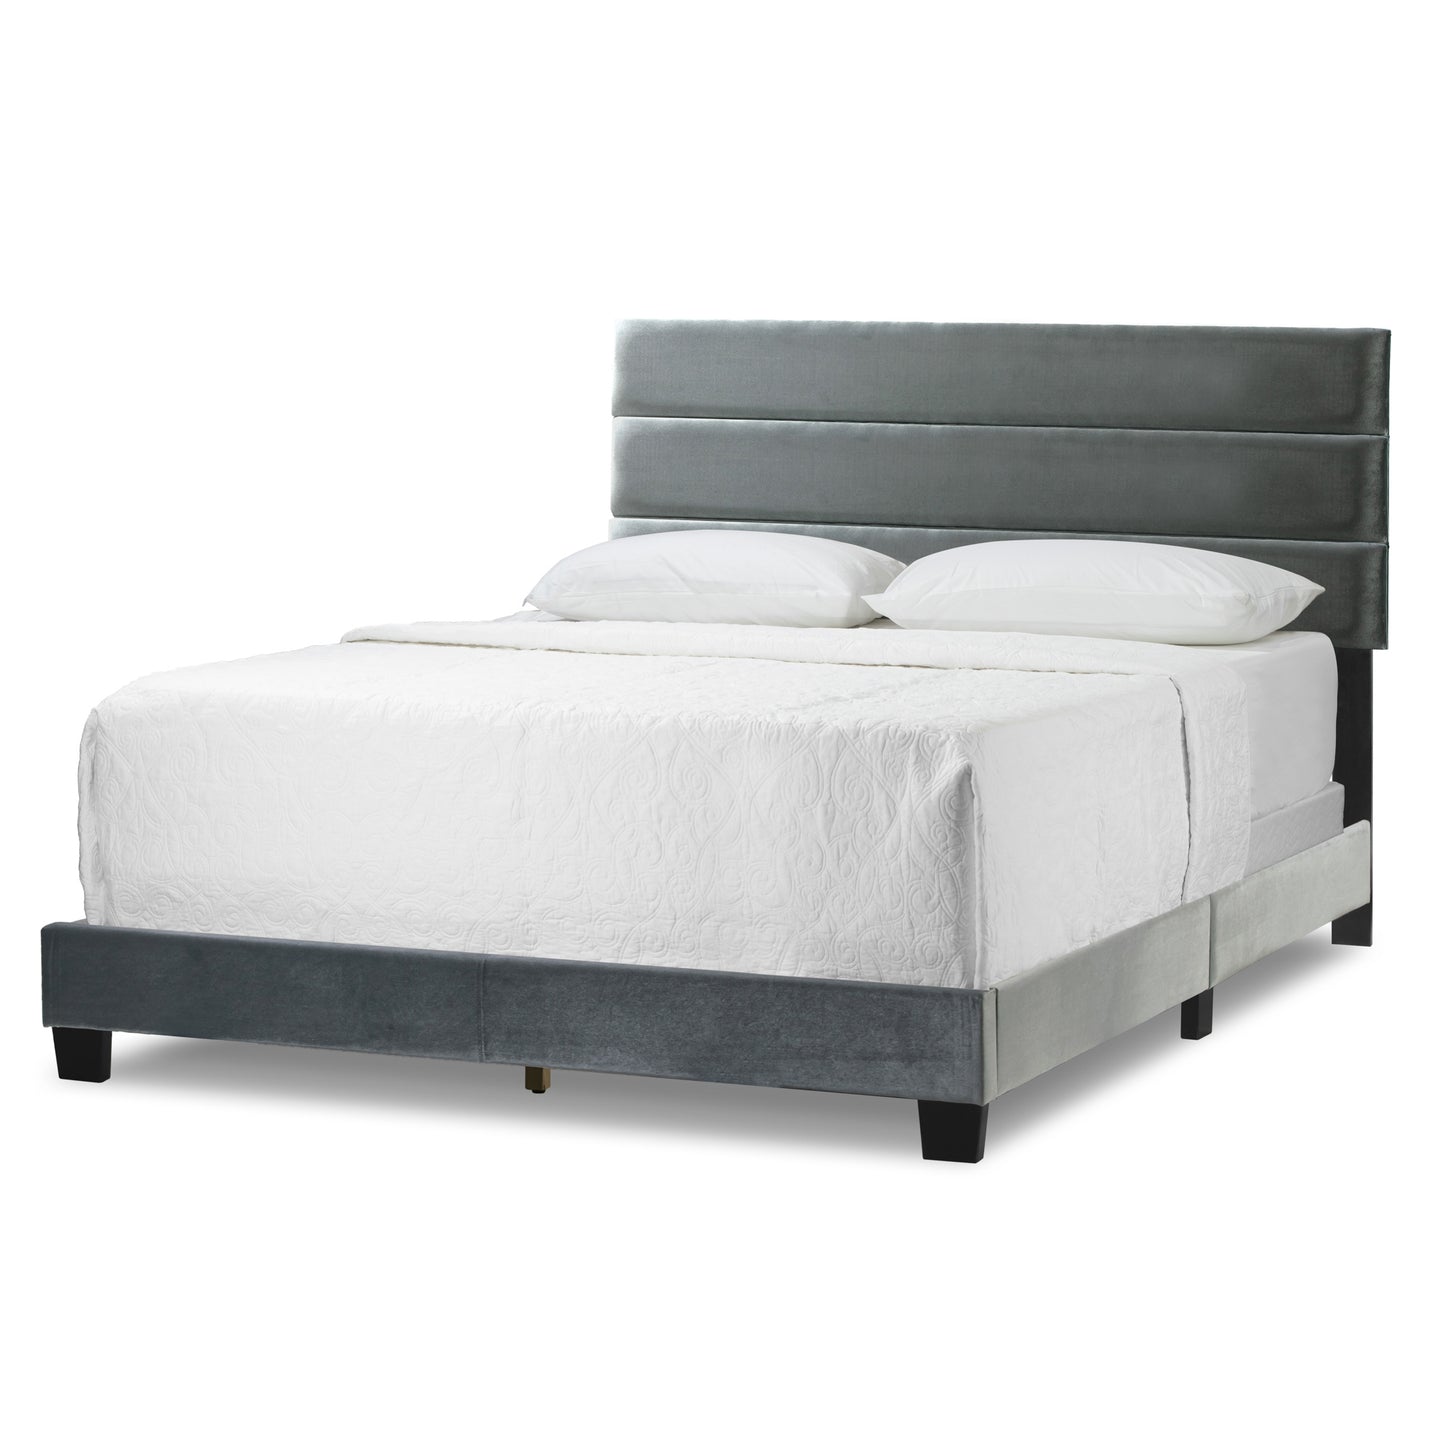 Aris Silver Grey Velvet King Bed with Line Stitching Tufting